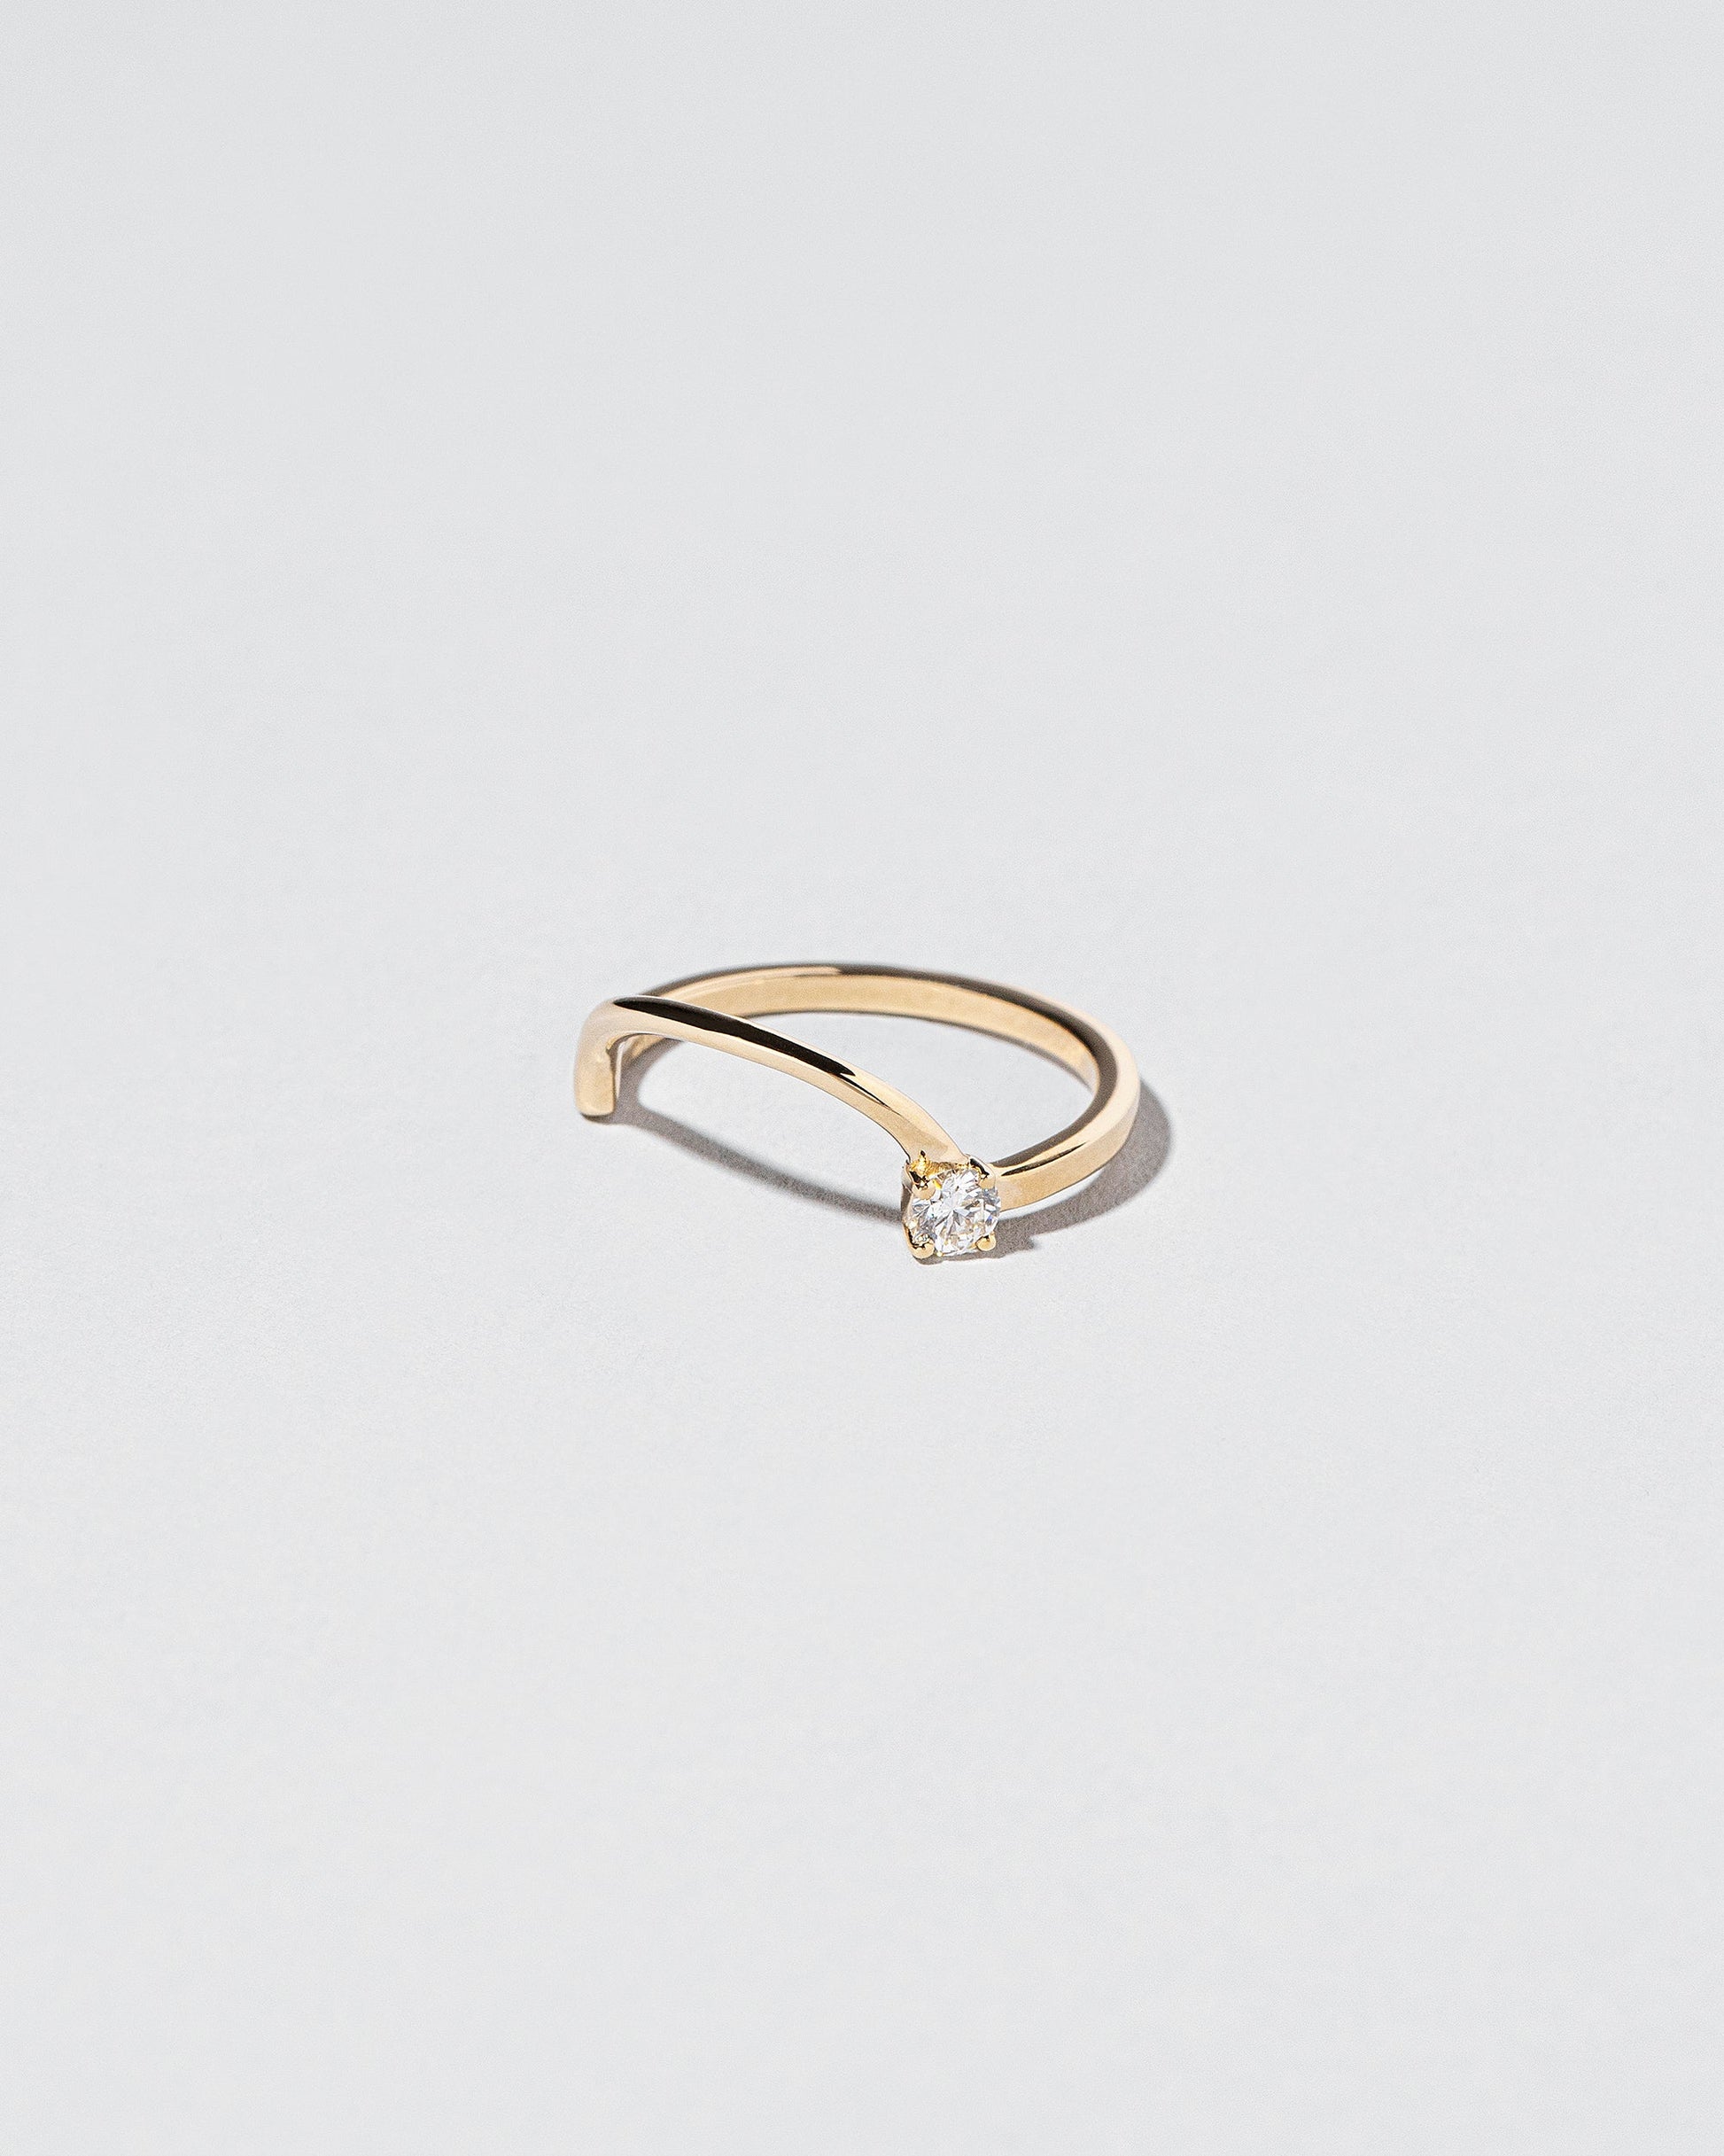 View from the side of the Yellow Gold White Diamond Half Hoop Band on light color background.